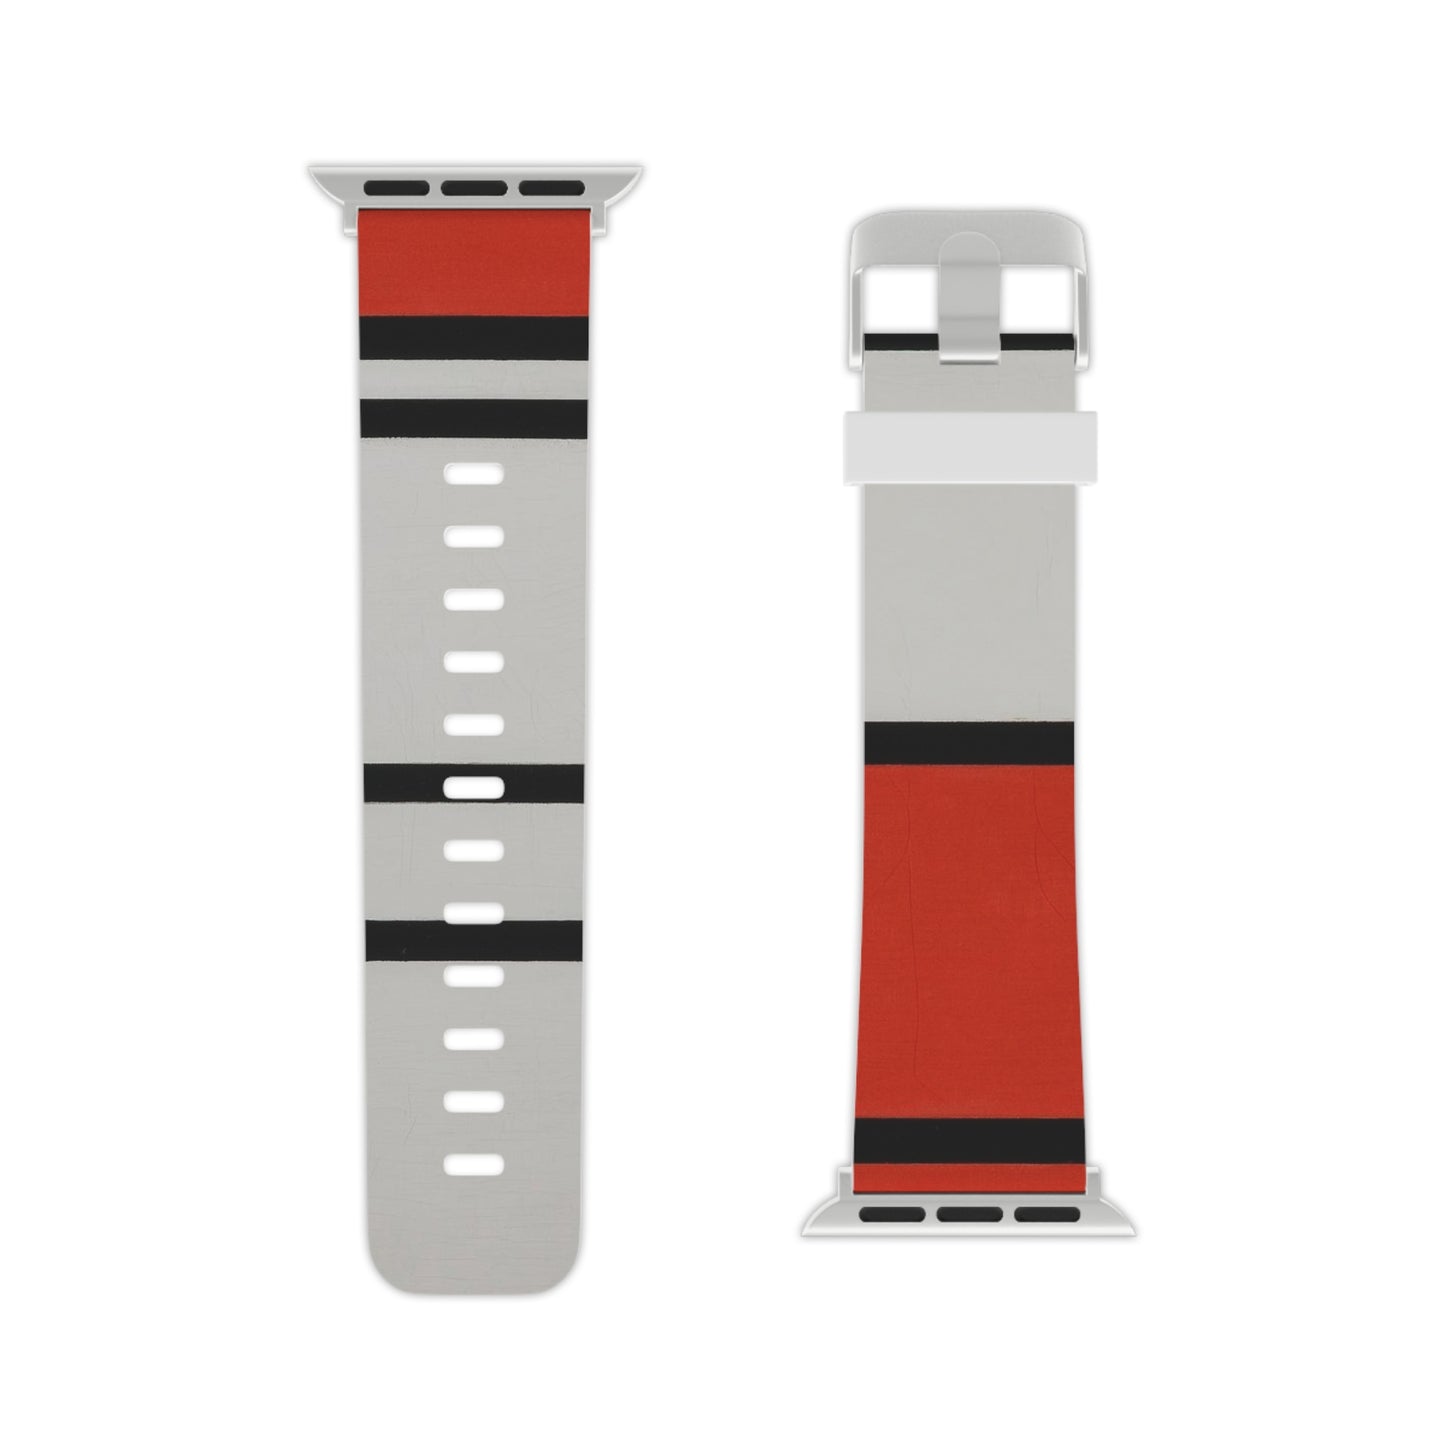 PIET MONDRIAN - COMPOSITION OF RED AND WHITE; Nom 1, COMPOSITION No. 4 WITH RED AND BLUE - ART WATCH BAND FOR APPLE WATCH